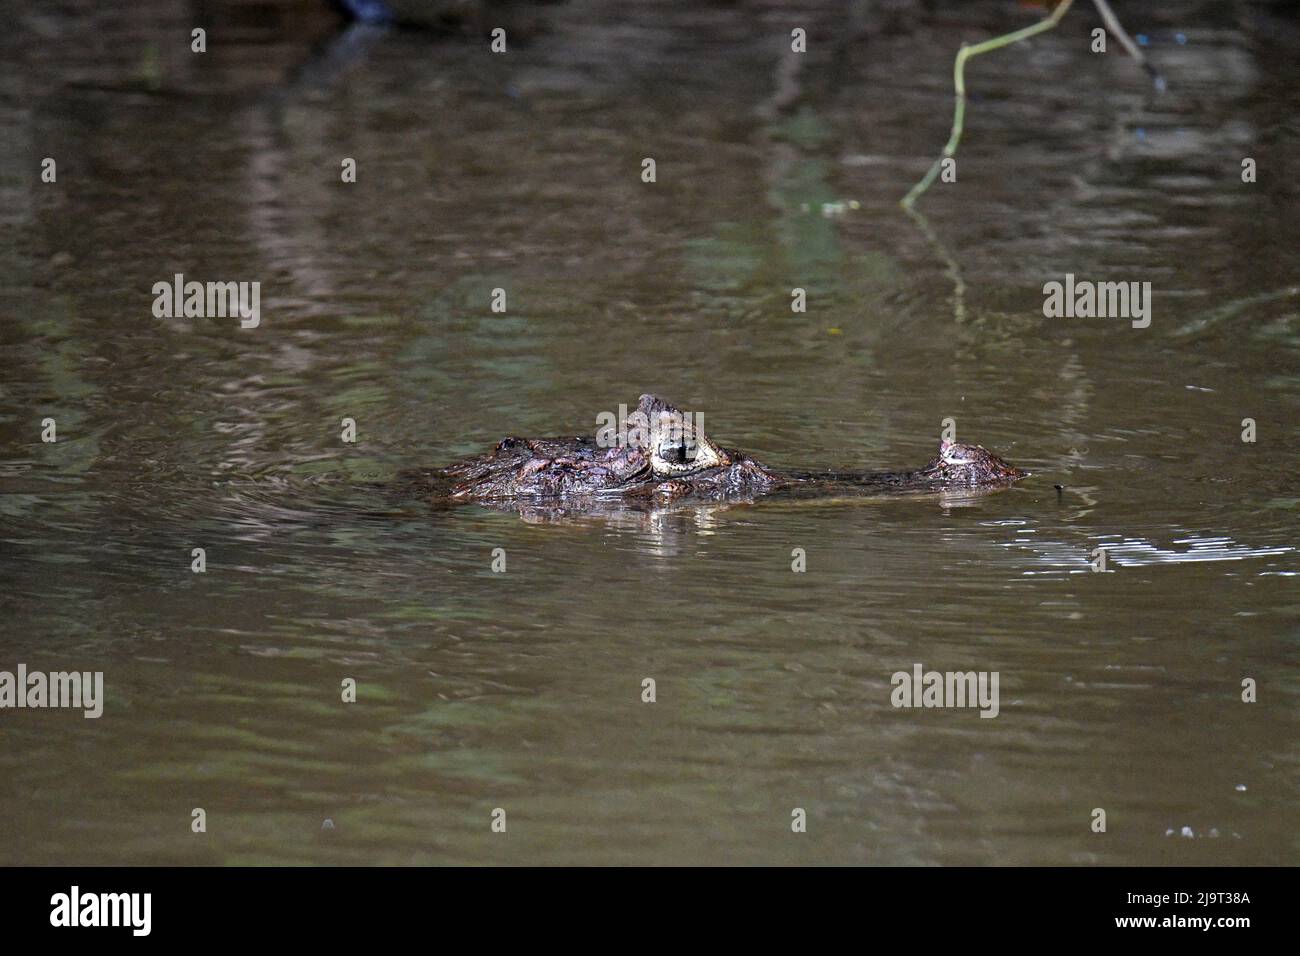 Caiman head in central american river Stock Photo